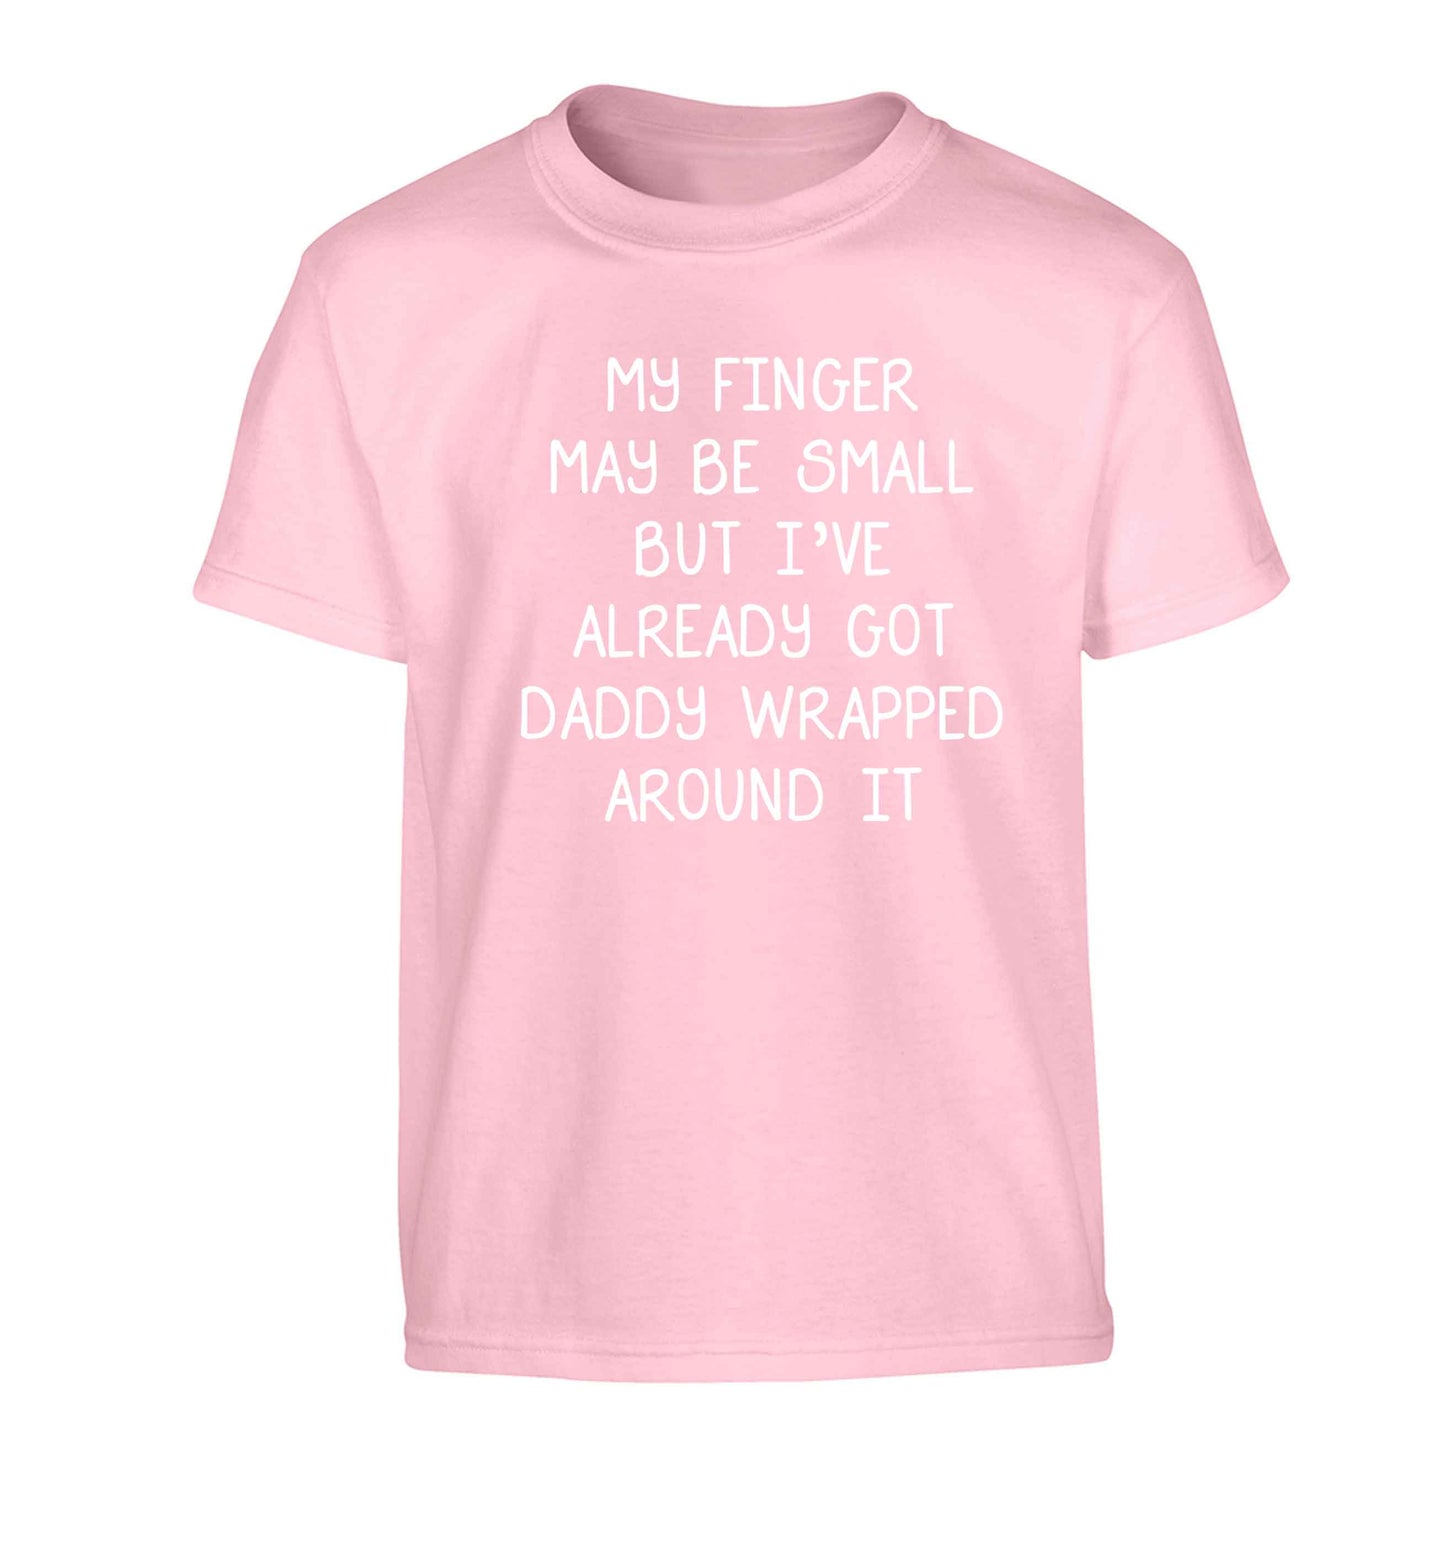 My finger may be small but I've already got daddy wrapped around it Children's light pink Tshirt 12-13 Years